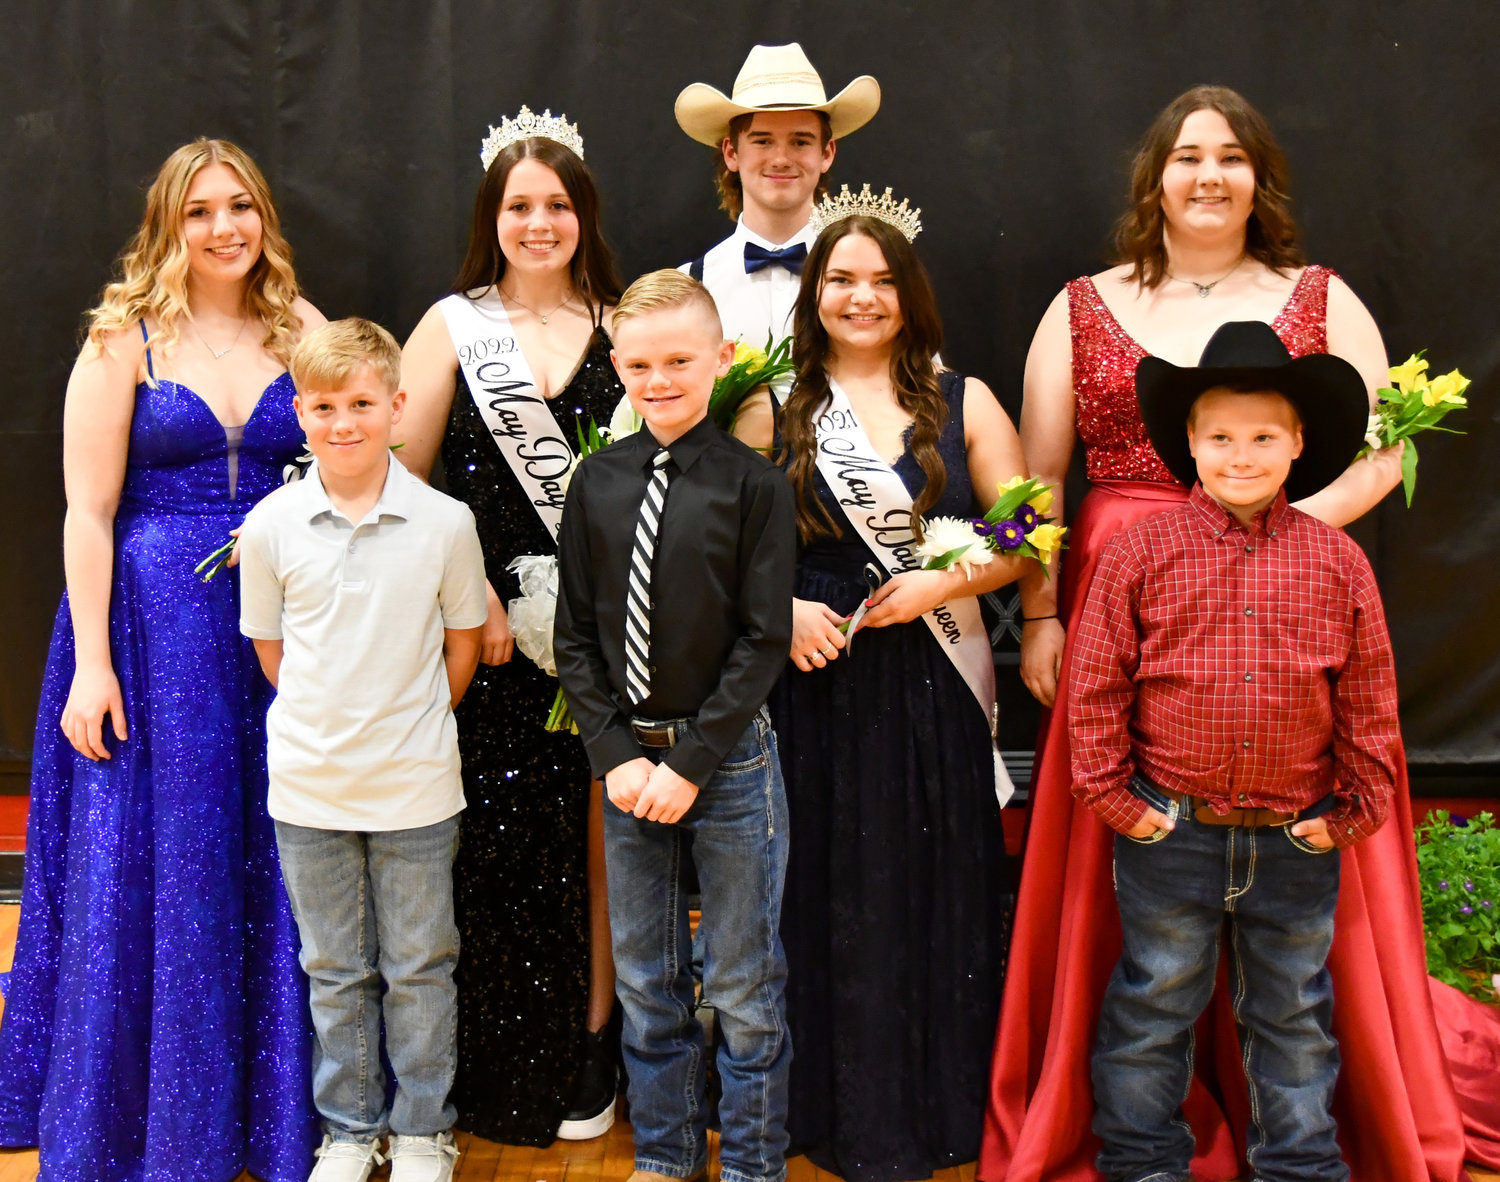 The May Day Court for 2022 included; (left to right) Riley Cooper, Jaeston Rodgers, Queen Ryleigh Long, Gage Vandegriffe, Kayden Robertson, Keleigh Guinn-retiring Queen, Mackenzie Garner, and Blake Garner.